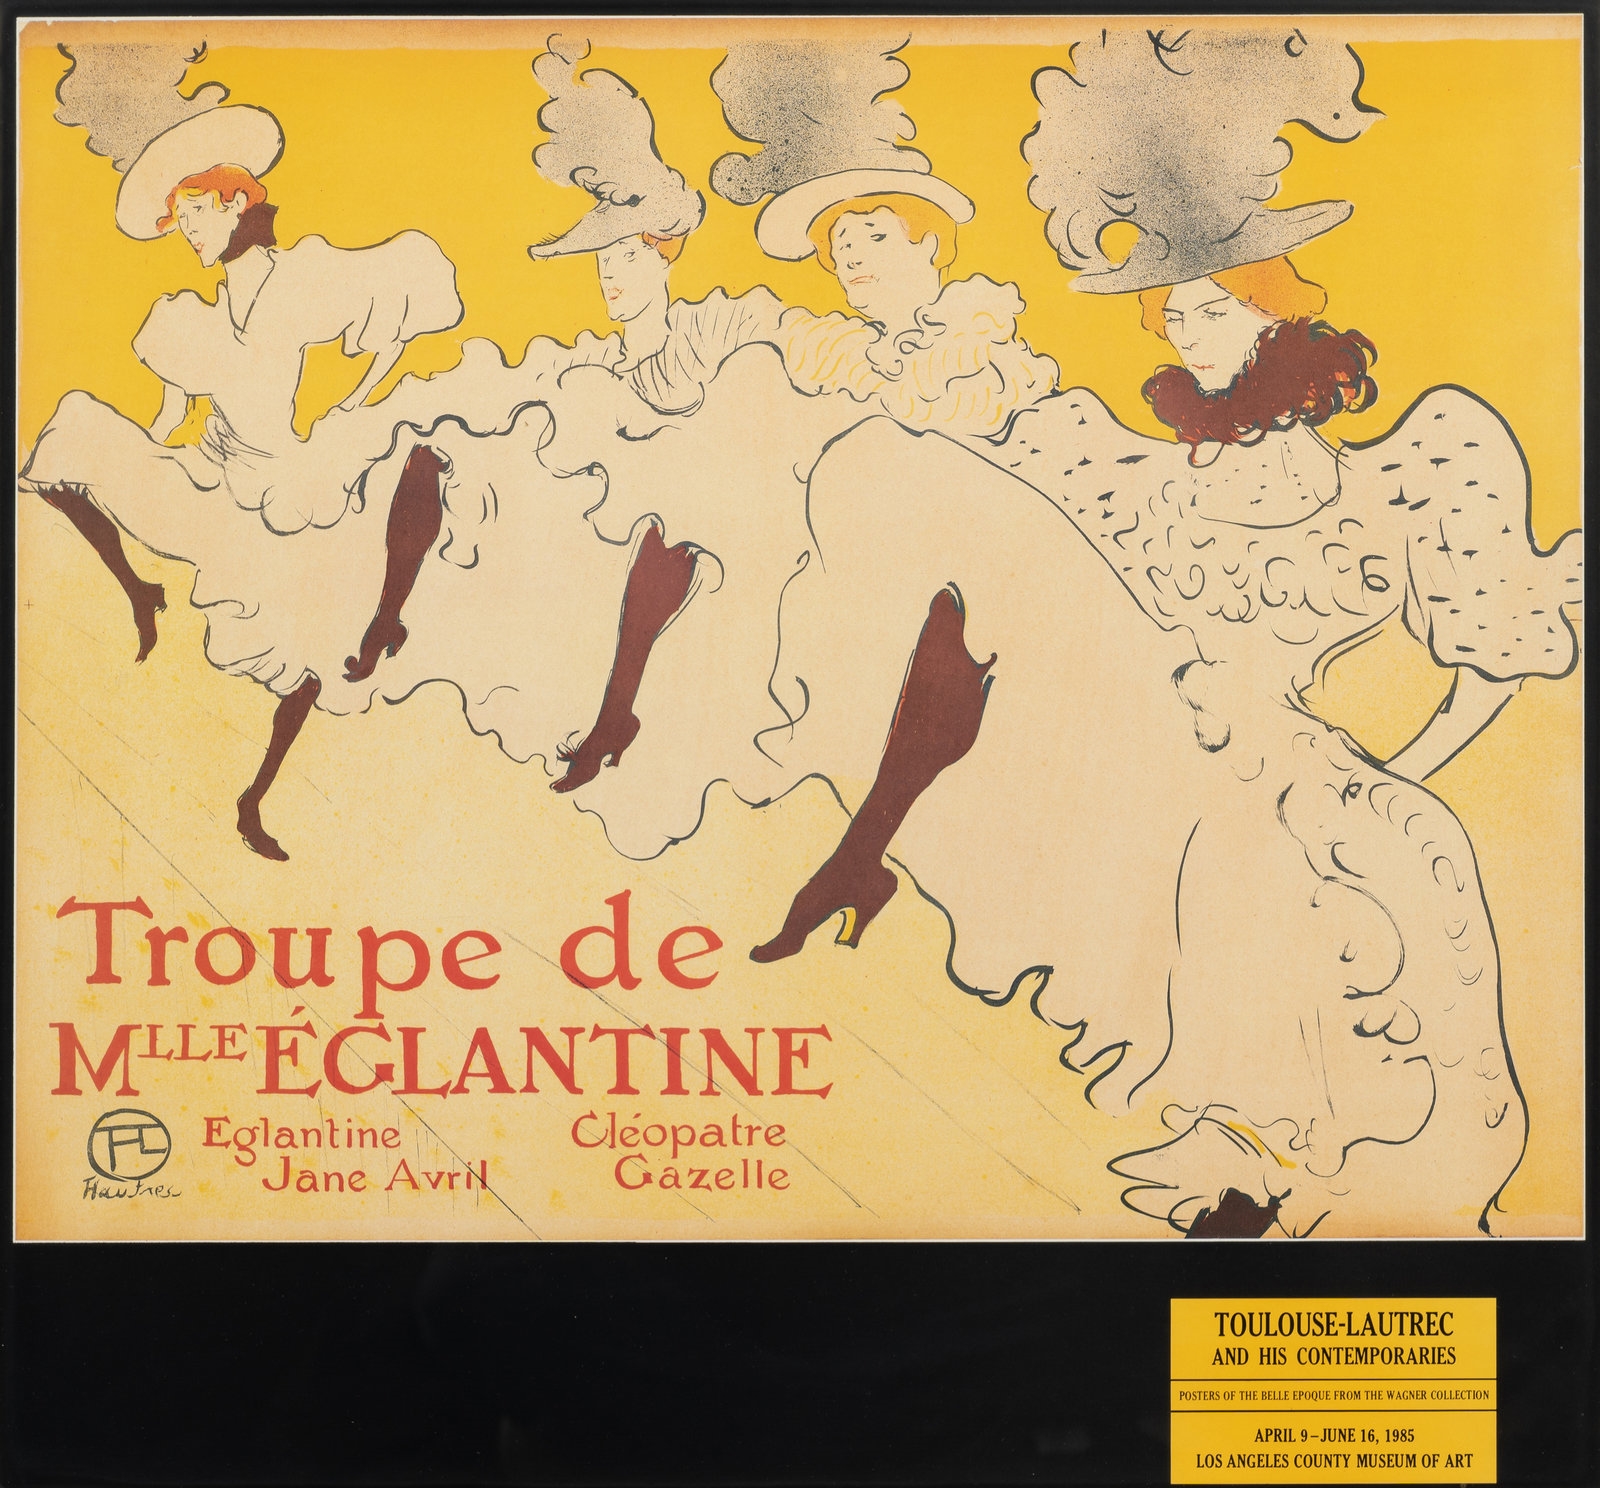 An Exhibition Poster Featuring an Image by Henri de Toulouse-Lautrec by Henri de Toulouse-Lautrec, 1985